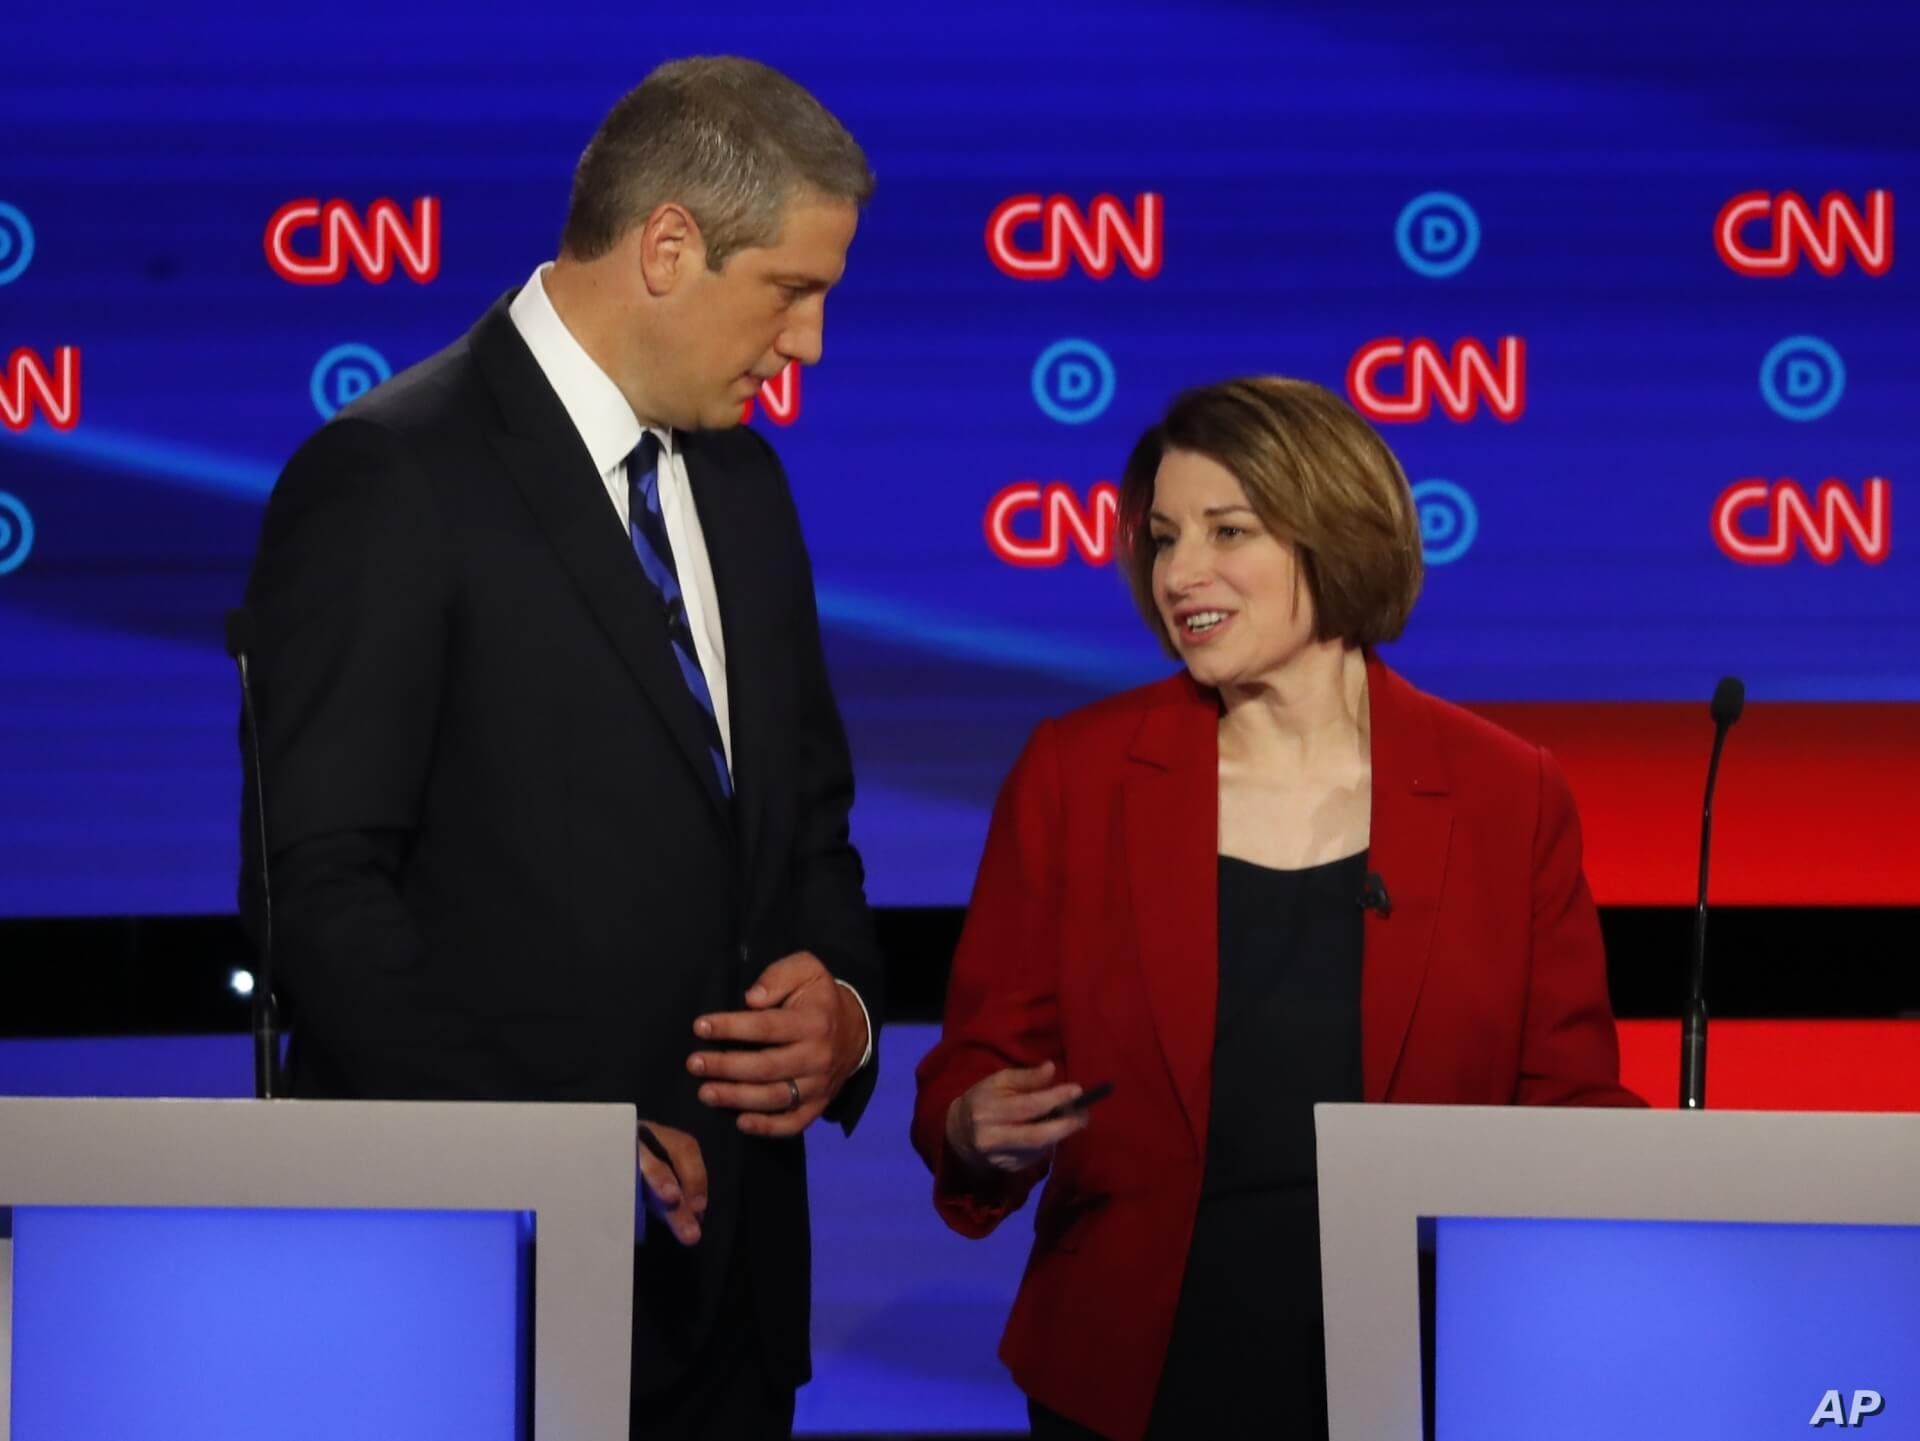 Rep. Tim Ryan, D-Ohio, and Sen. Amy Klobuchar, D-Minn. talk during a break in the first of two Democratic presidential primary debates hosted by CNN Tuesday, July 30, 2019, in the Fox Theatre in Detroit. (AP Photo/Paul Sancya)